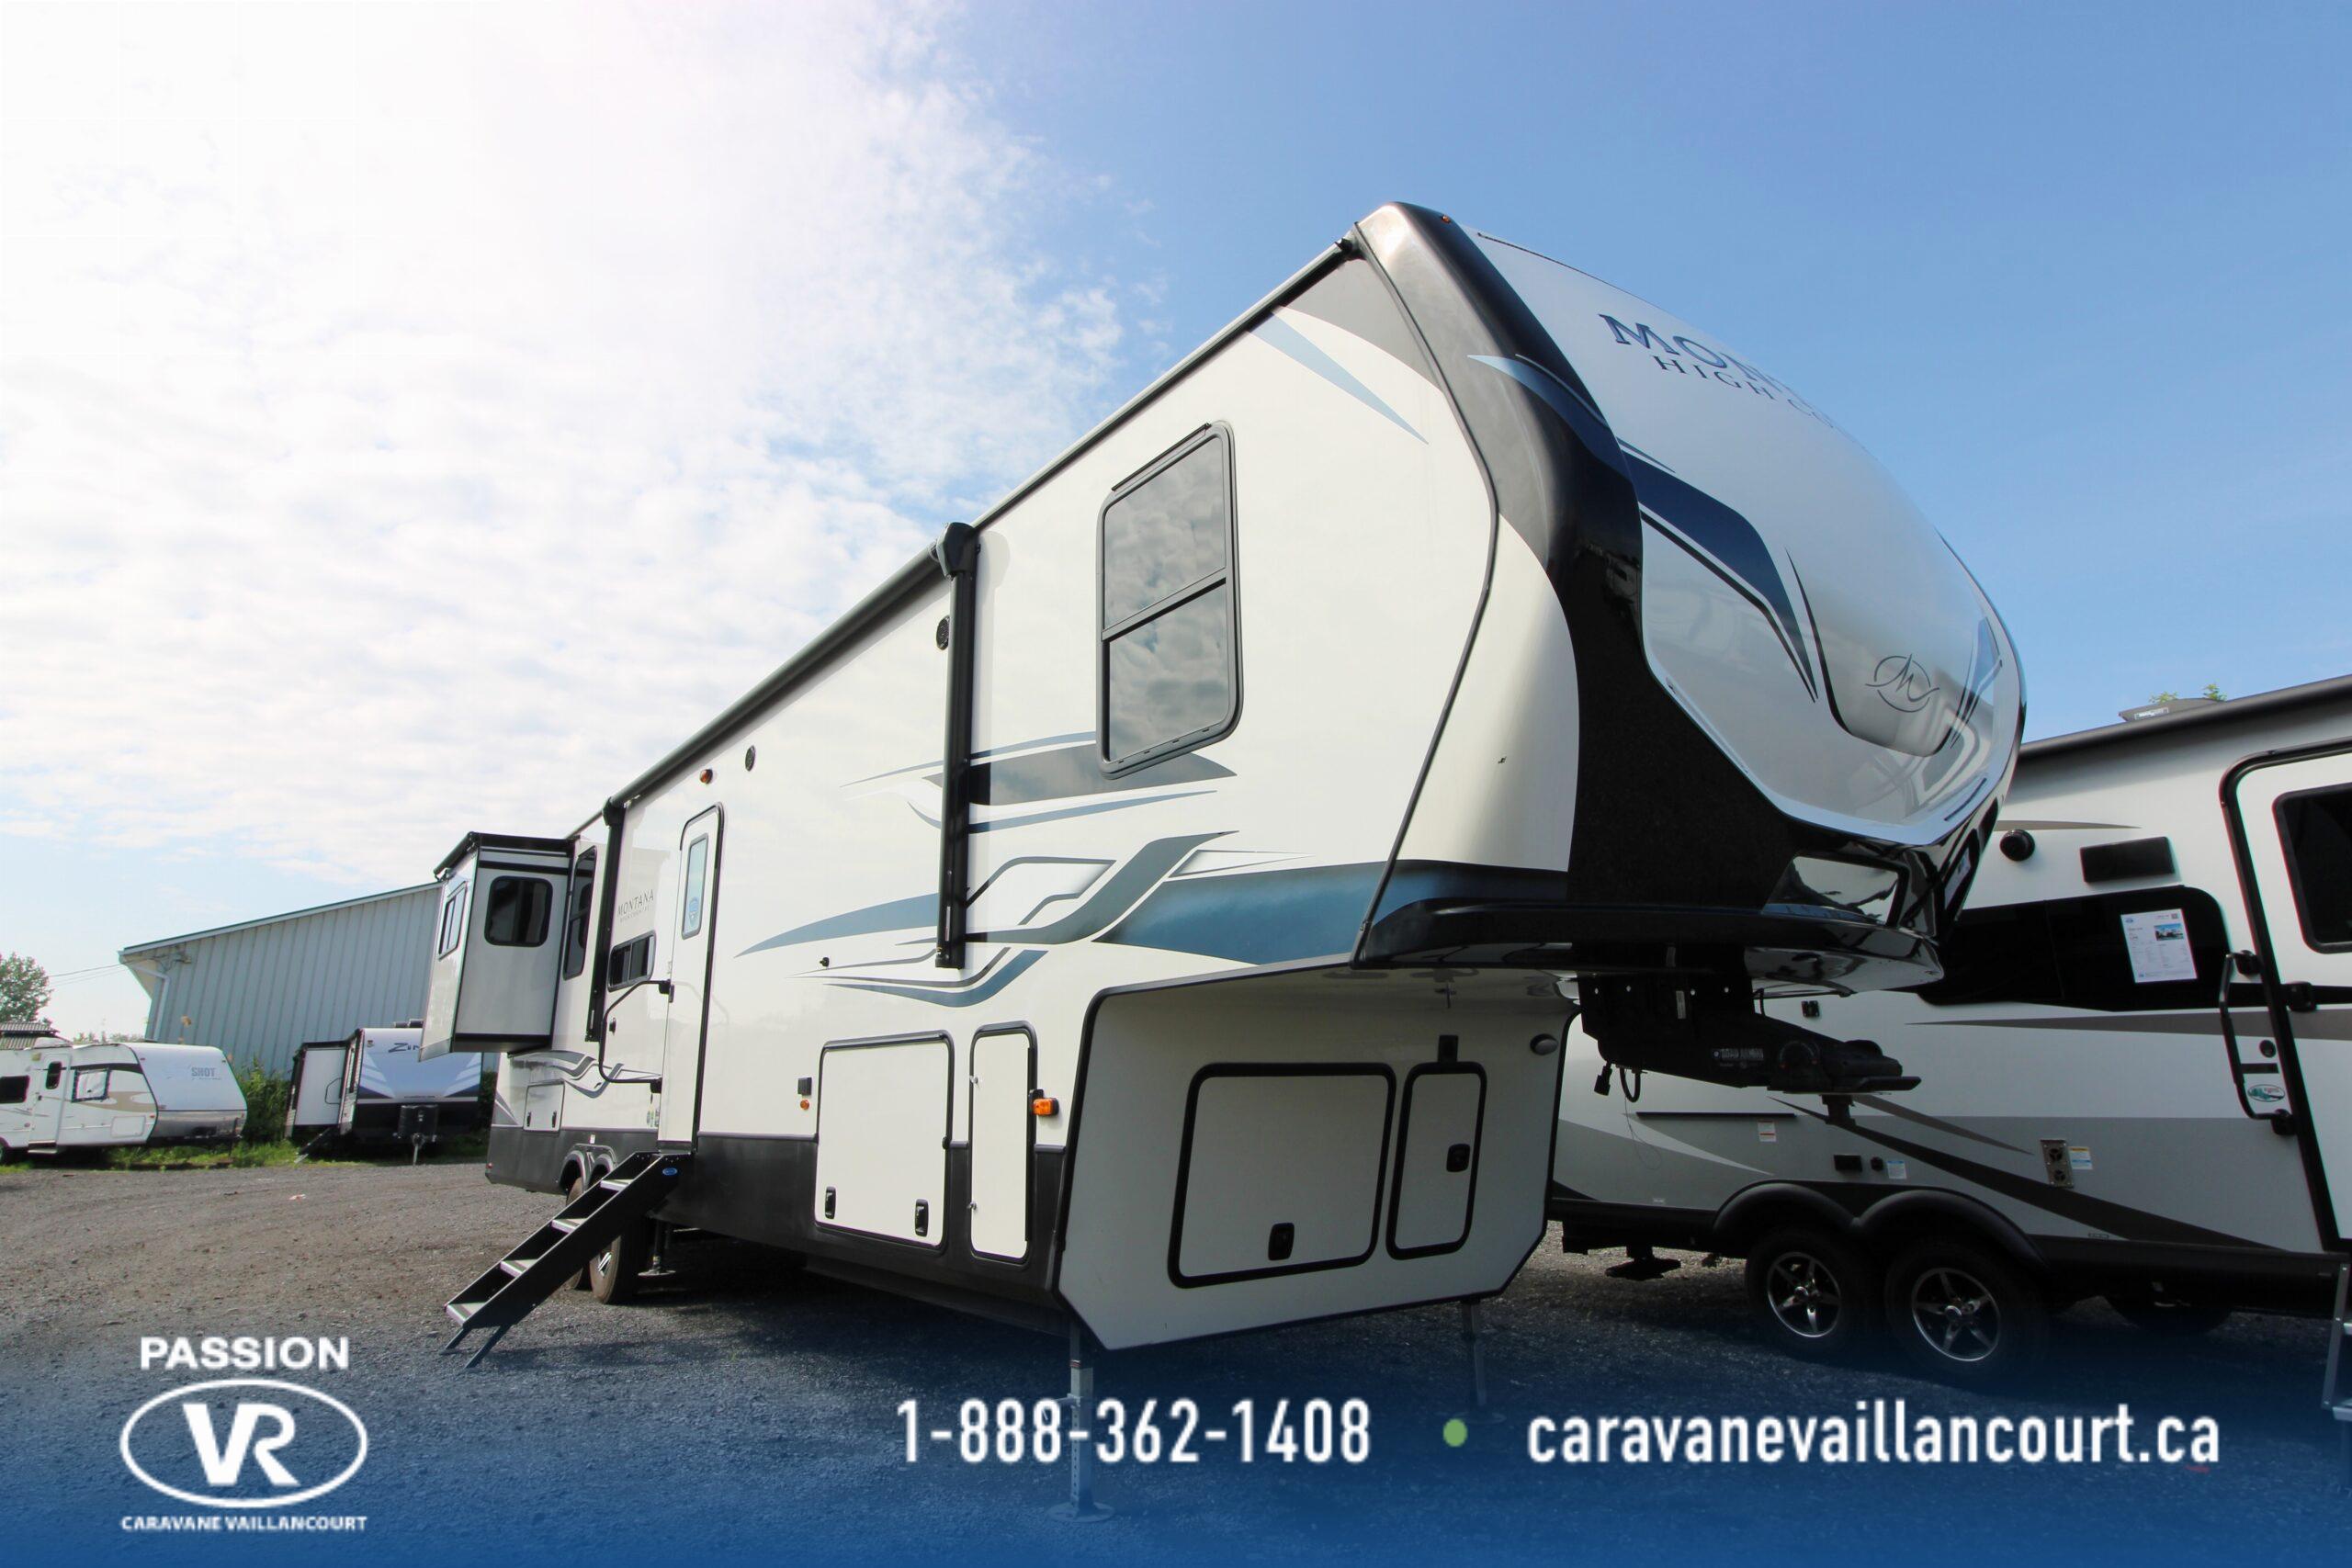 Montana 373RD High Country Passion VR Caravane Vaillancourt